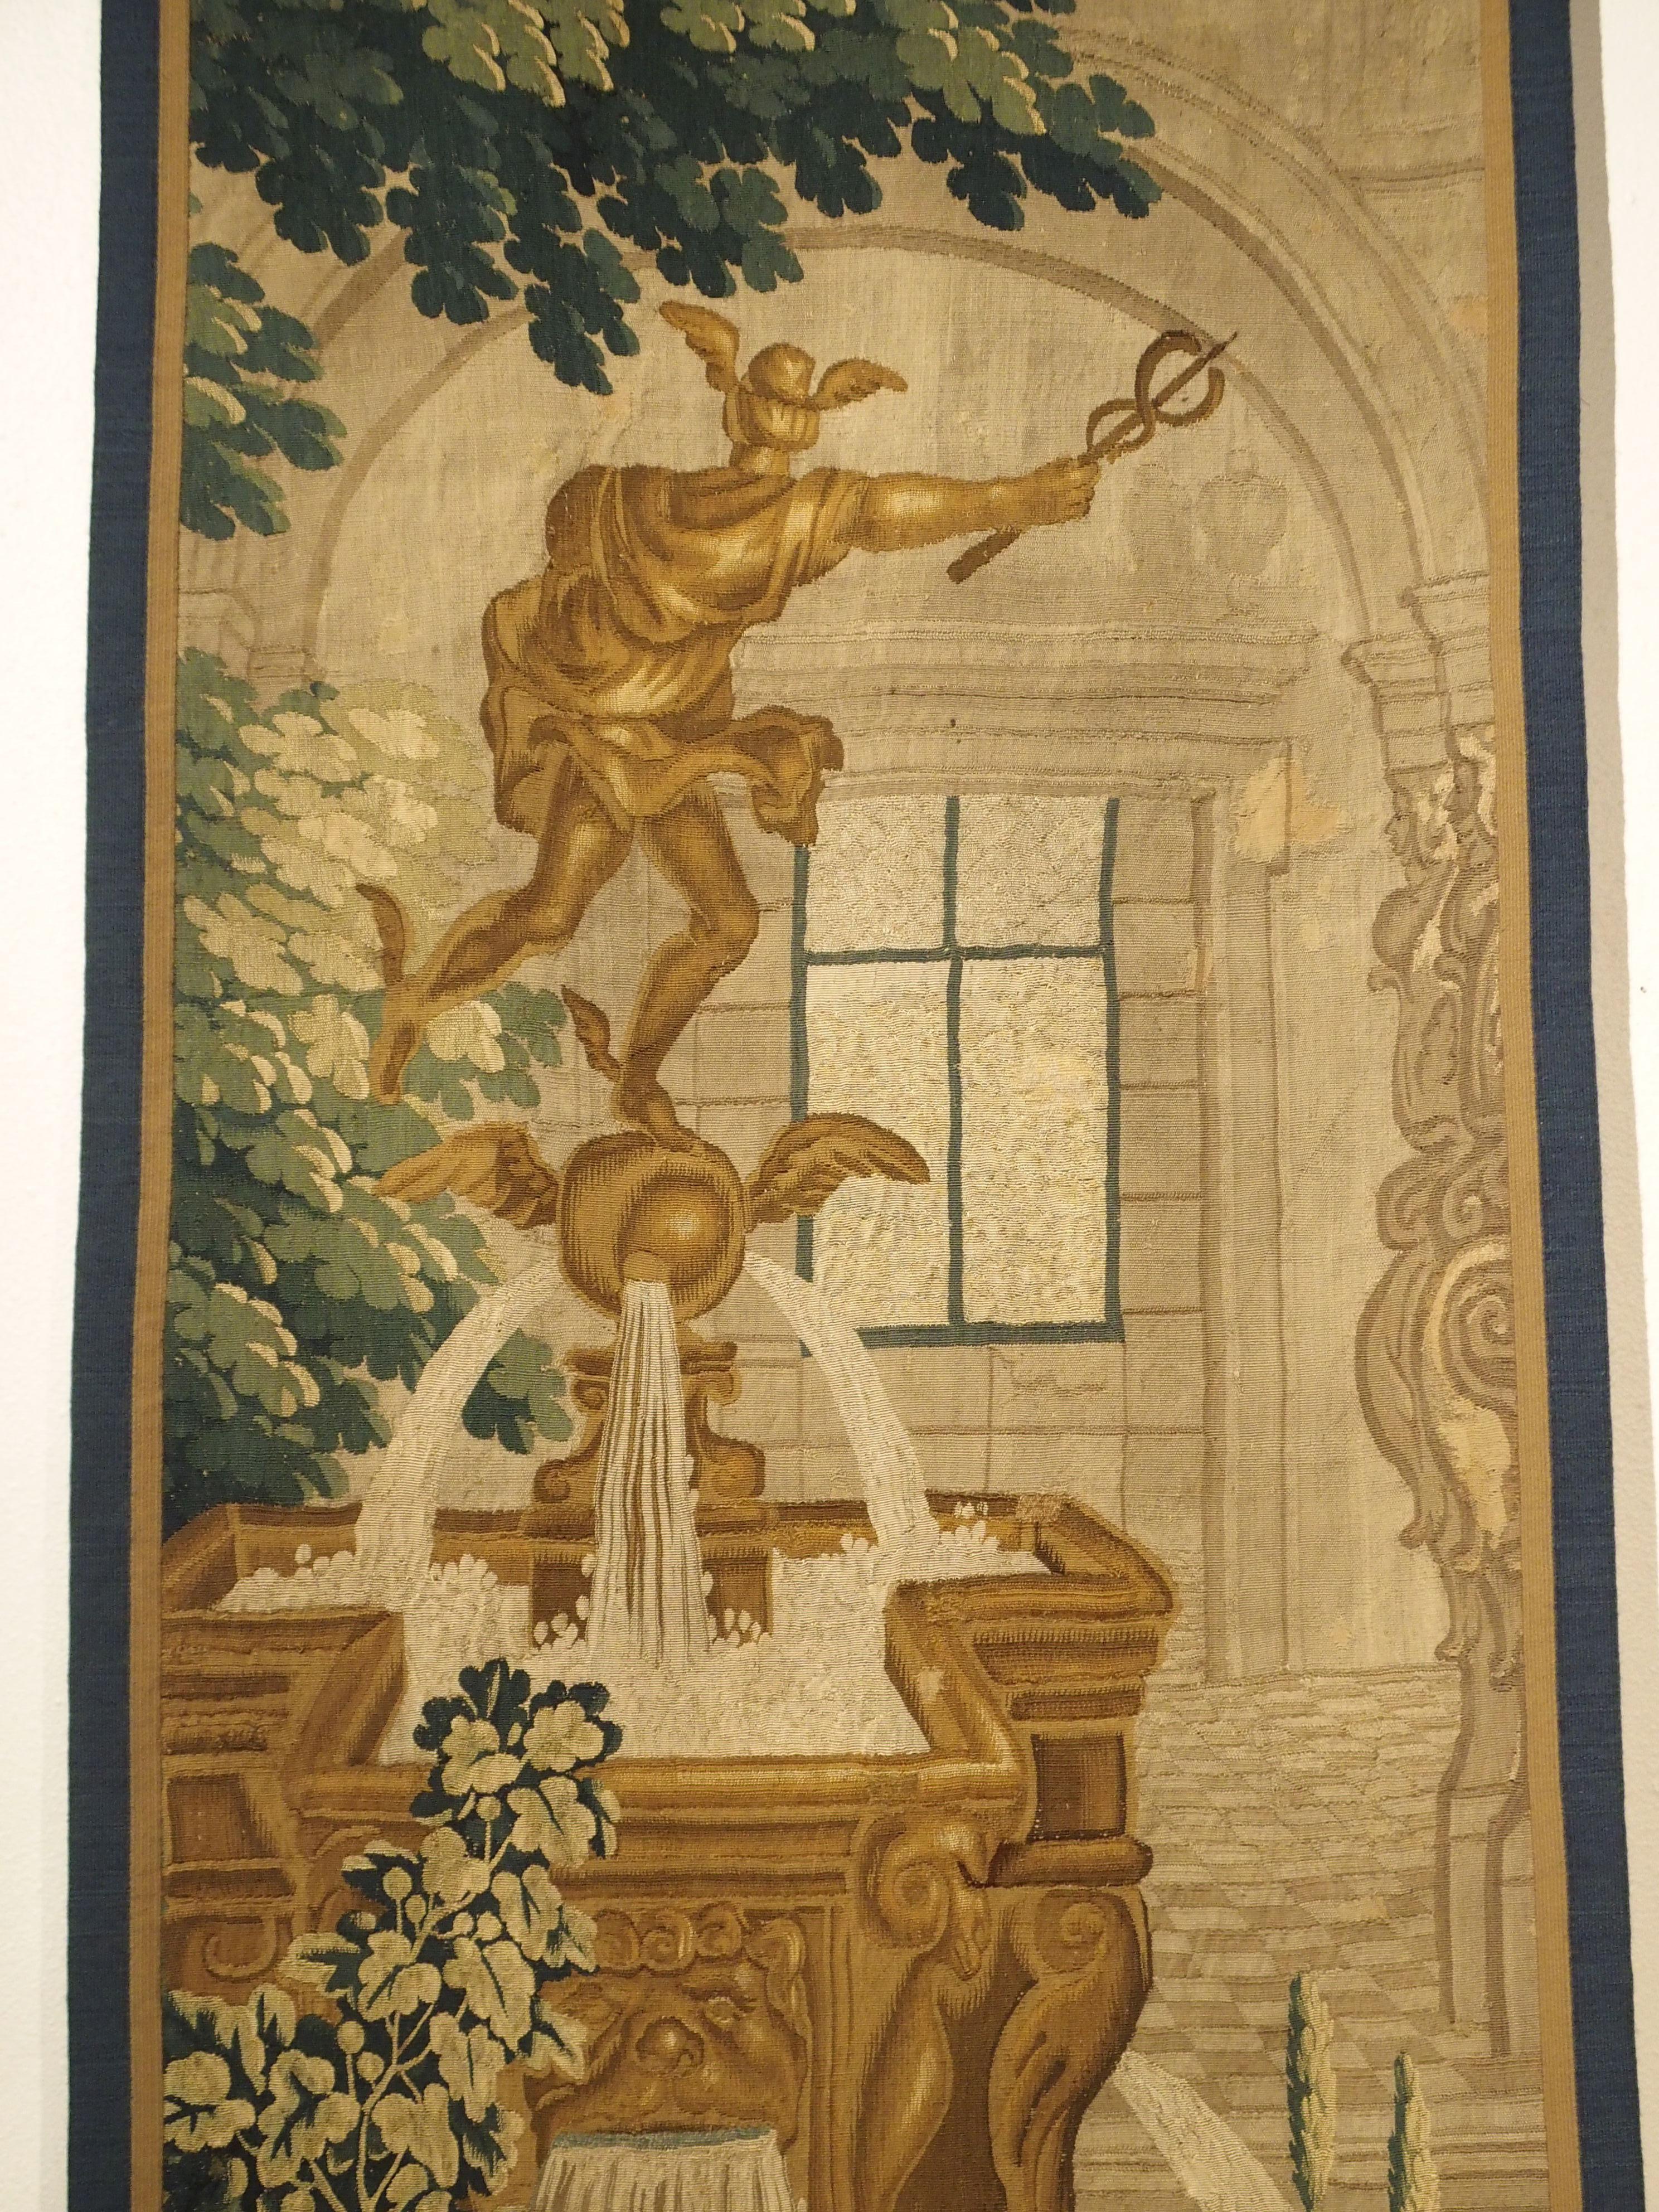 Fountain and Architecture

This narrow silk and wool tapestry fragment dates to the 1600s and is from Brussels. It is depicting a statue of the Greek God, Hermes (Mercury to the Romans) who was the messenger to the Gods. He is perched upon a